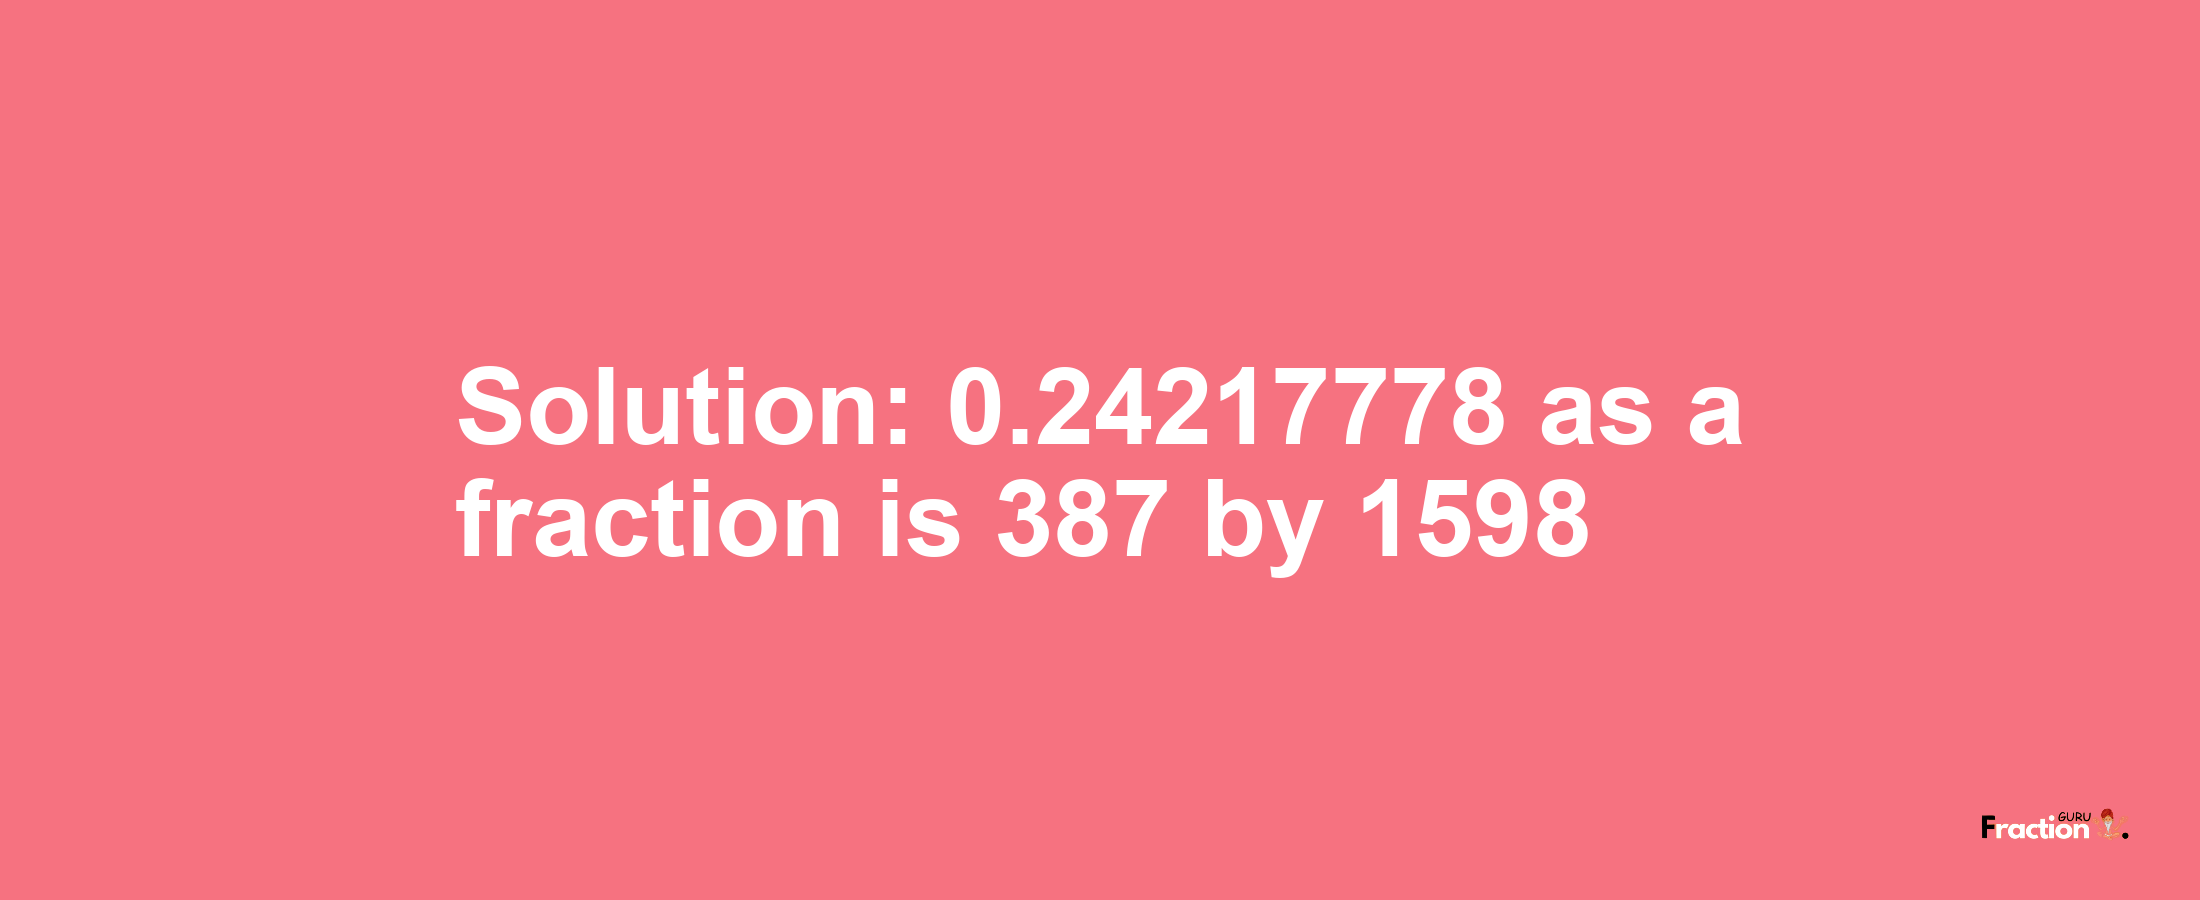 Solution:0.24217778 as a fraction is 387/1598